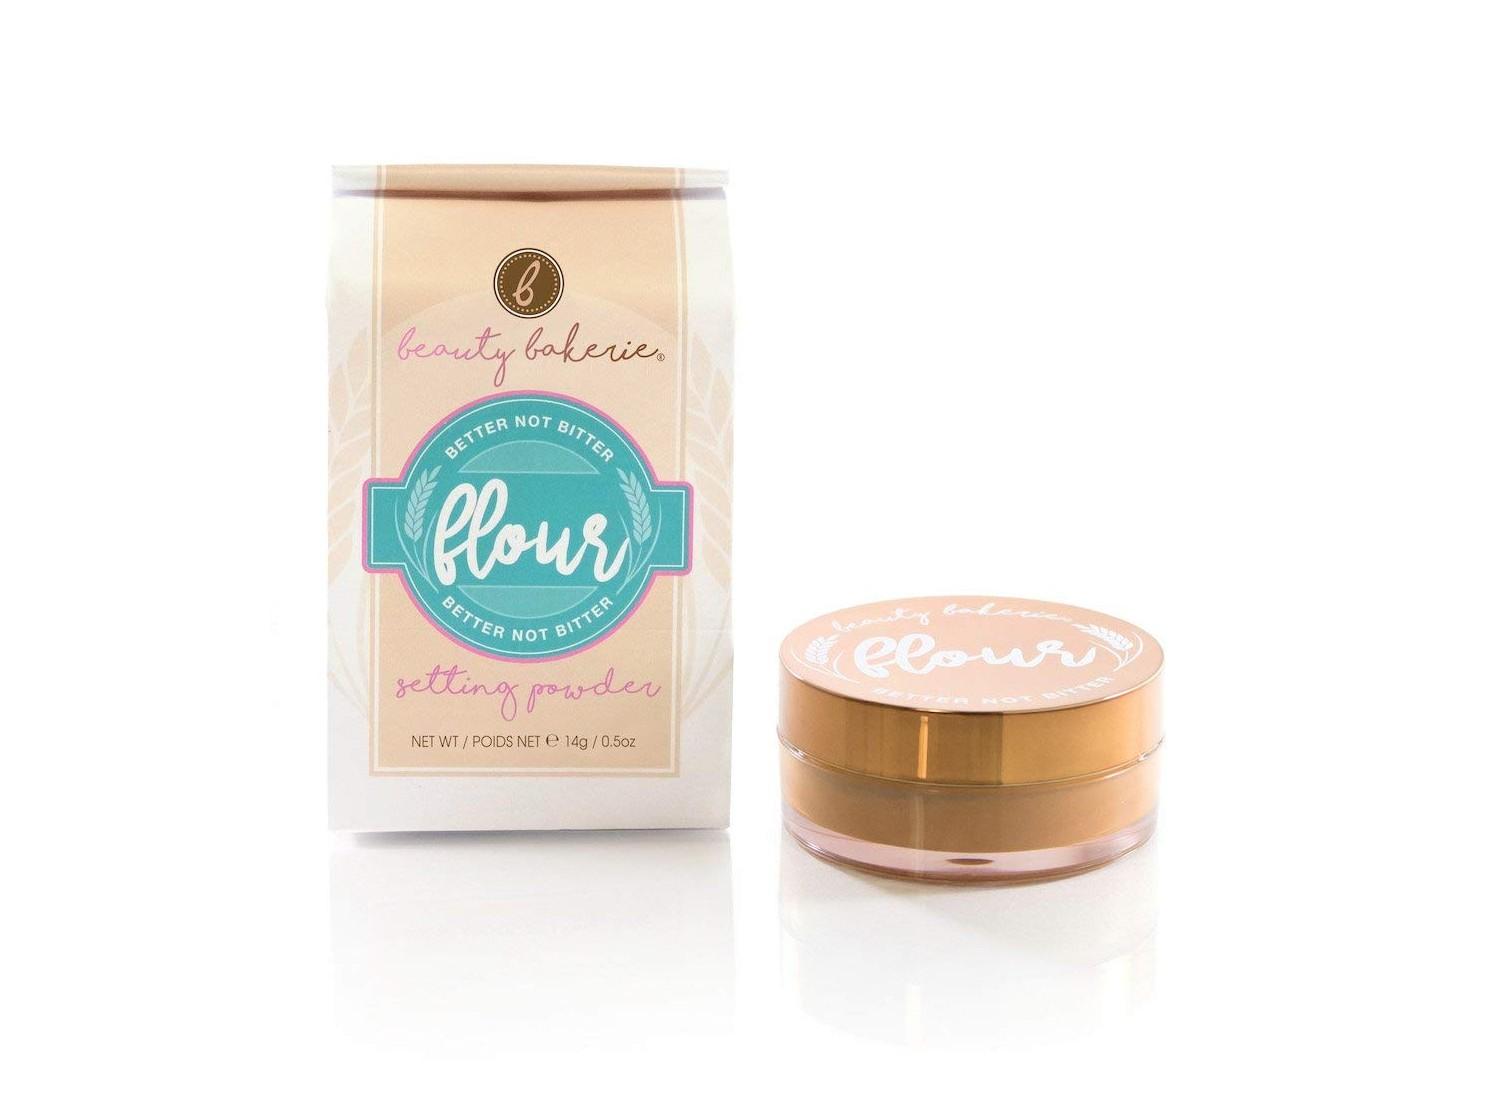 A Beauty Bakerie Setting Powder container and packaging.